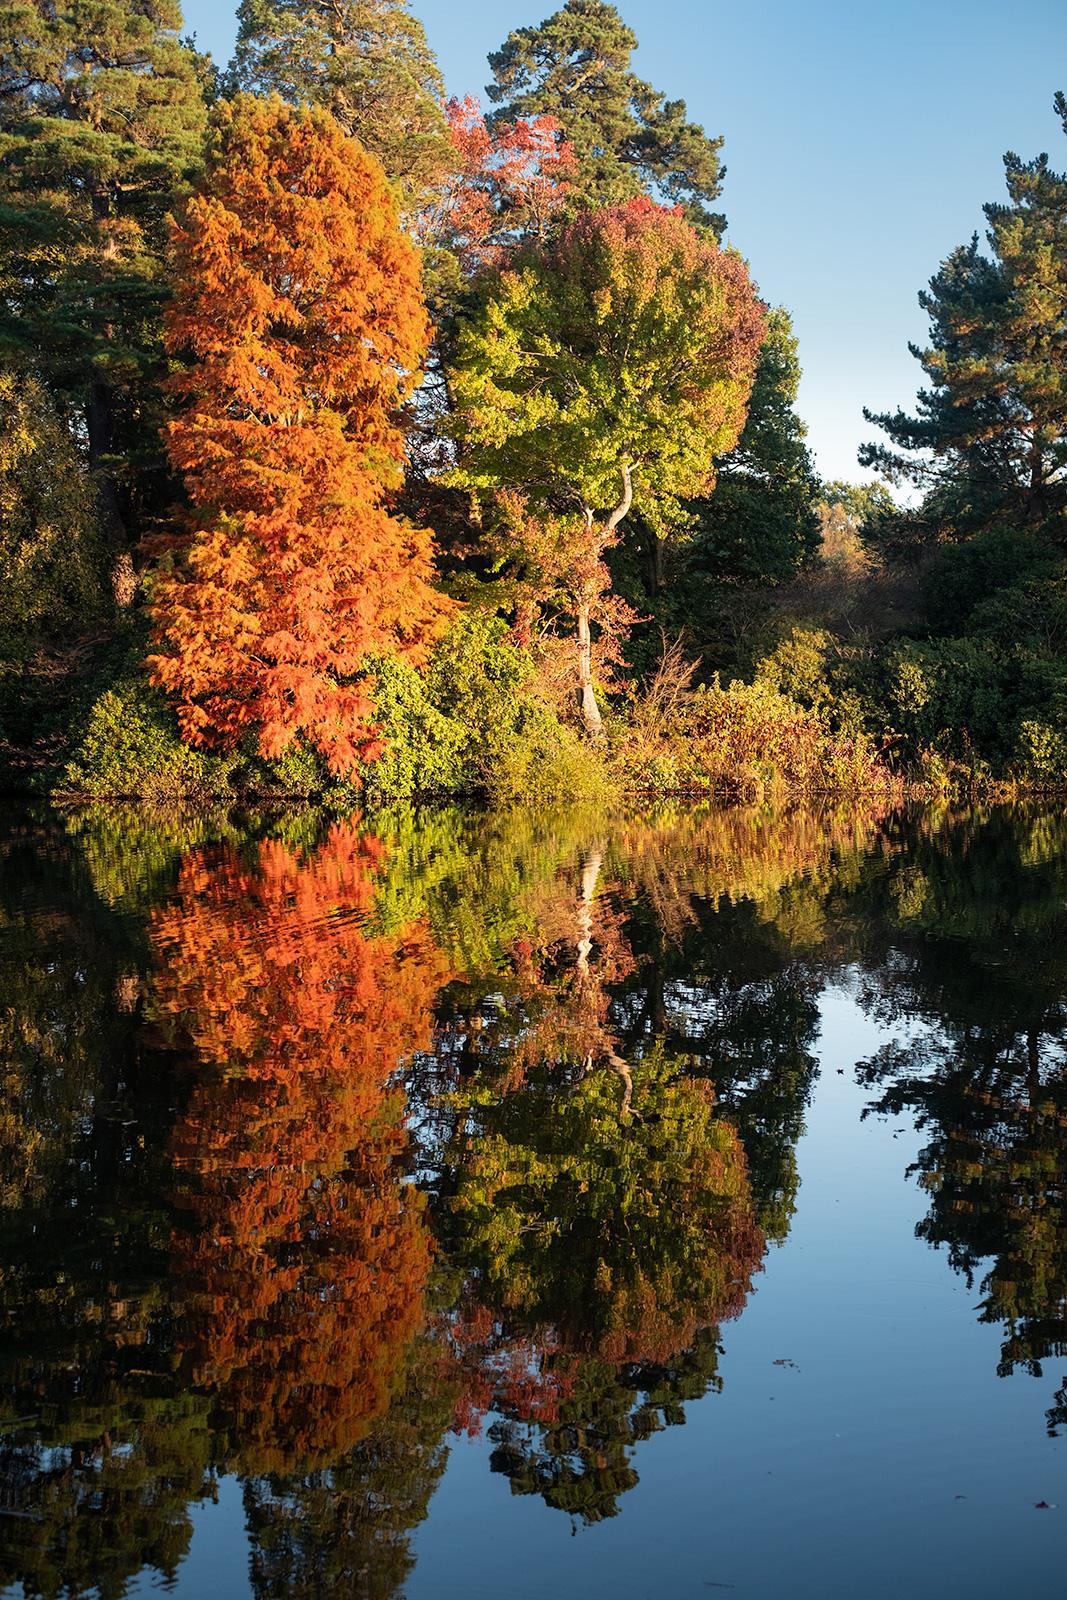 Orange, red, yellow and green autumn trees illuminated by sunlight and reflected in water Sheffield Park East Sussex UK Colour portrait nature photograph © P. Maton 2018